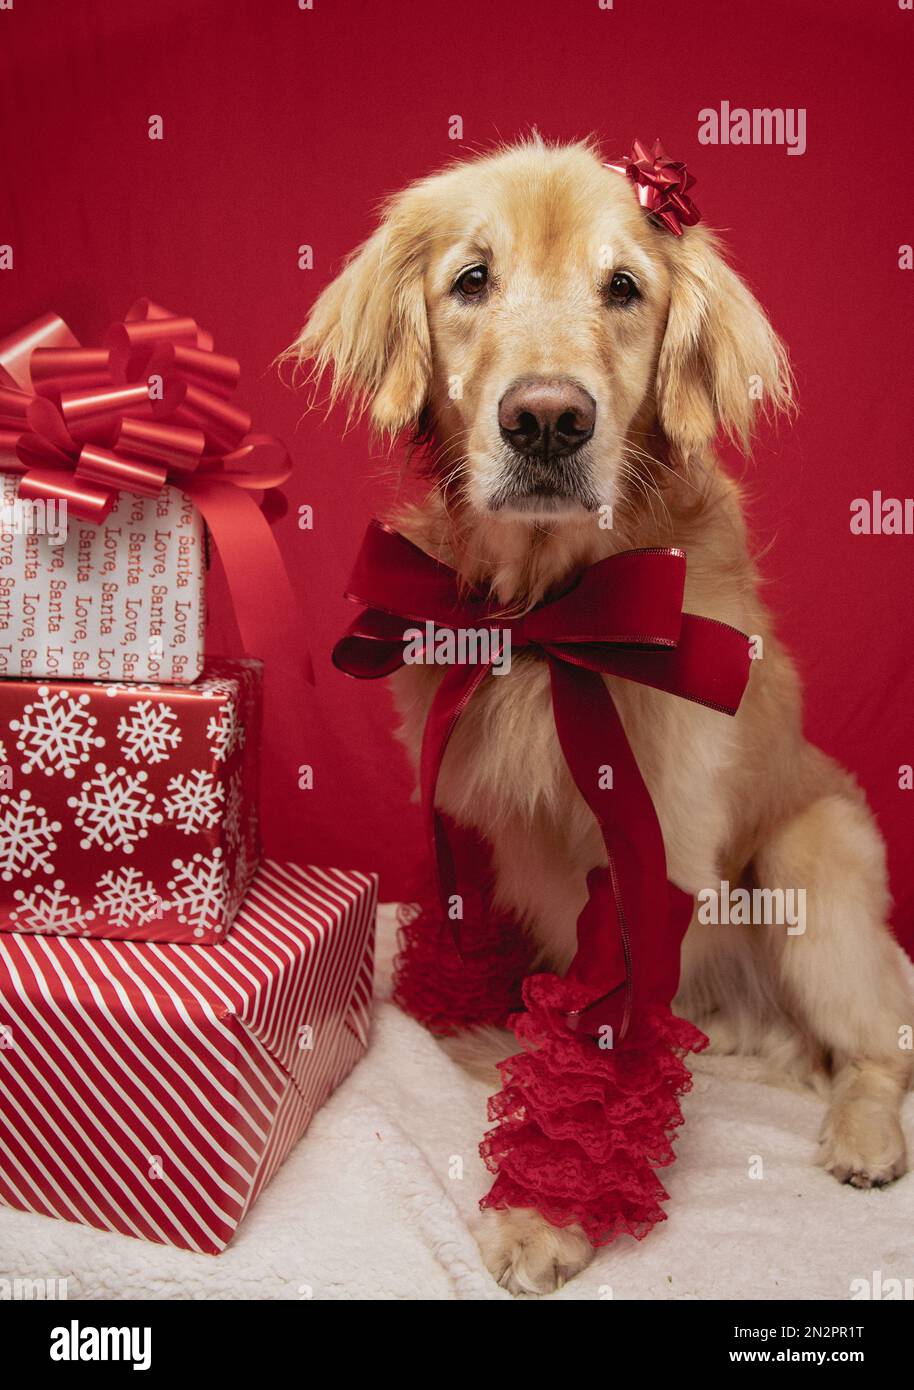 Close-up portrait of a golden retriever with a bow on it's head next to a stack of Christmas gifts Stock Photo